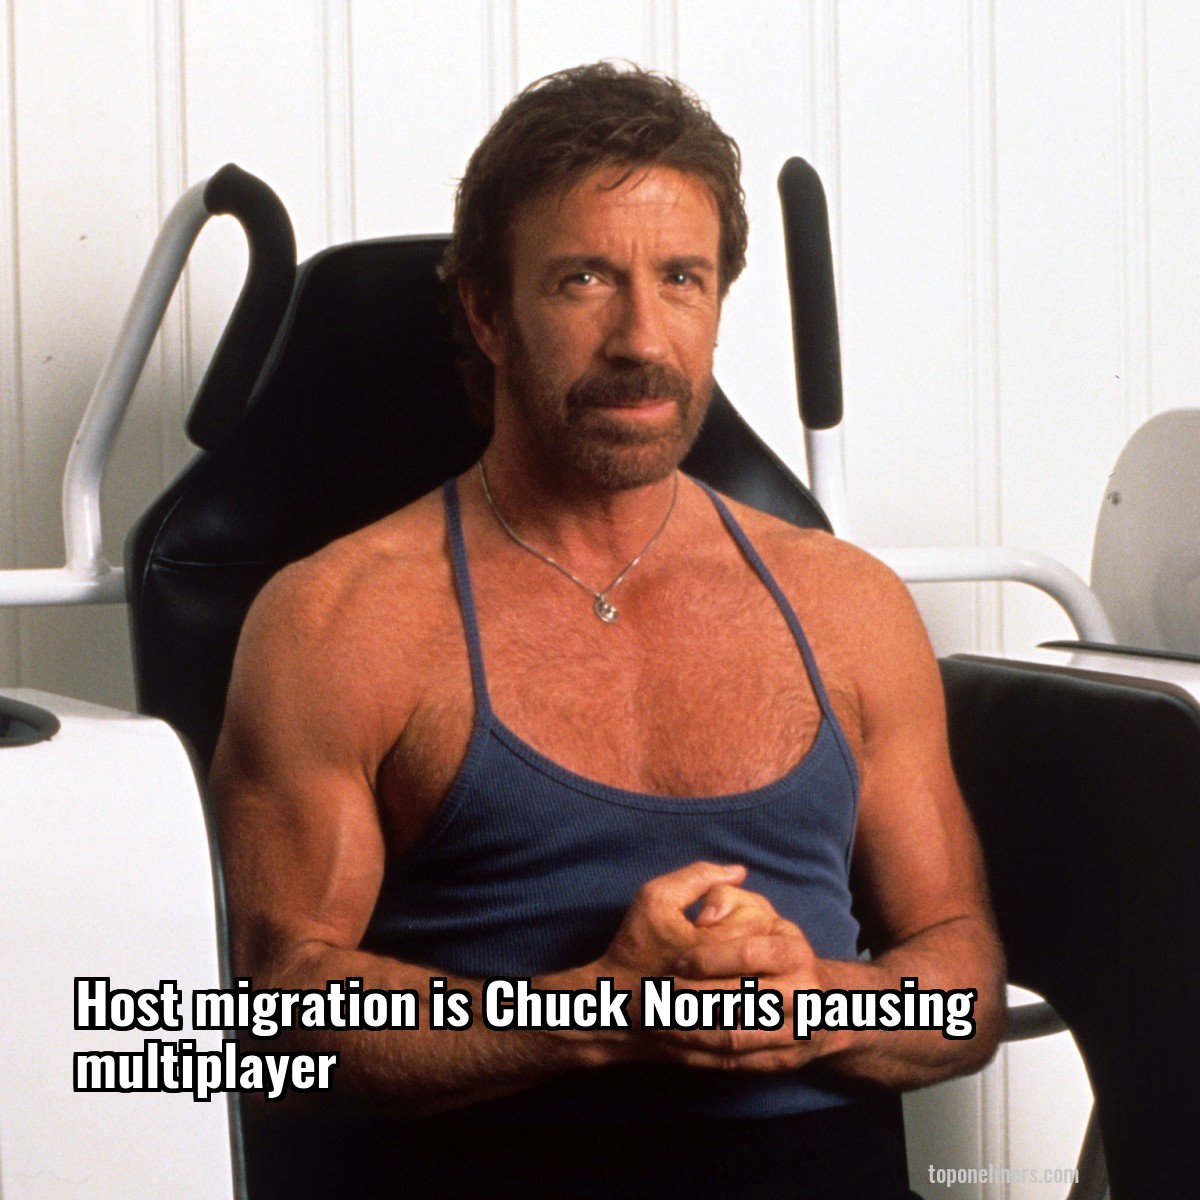 Host migration is Chuck Norris pausing multiplayer